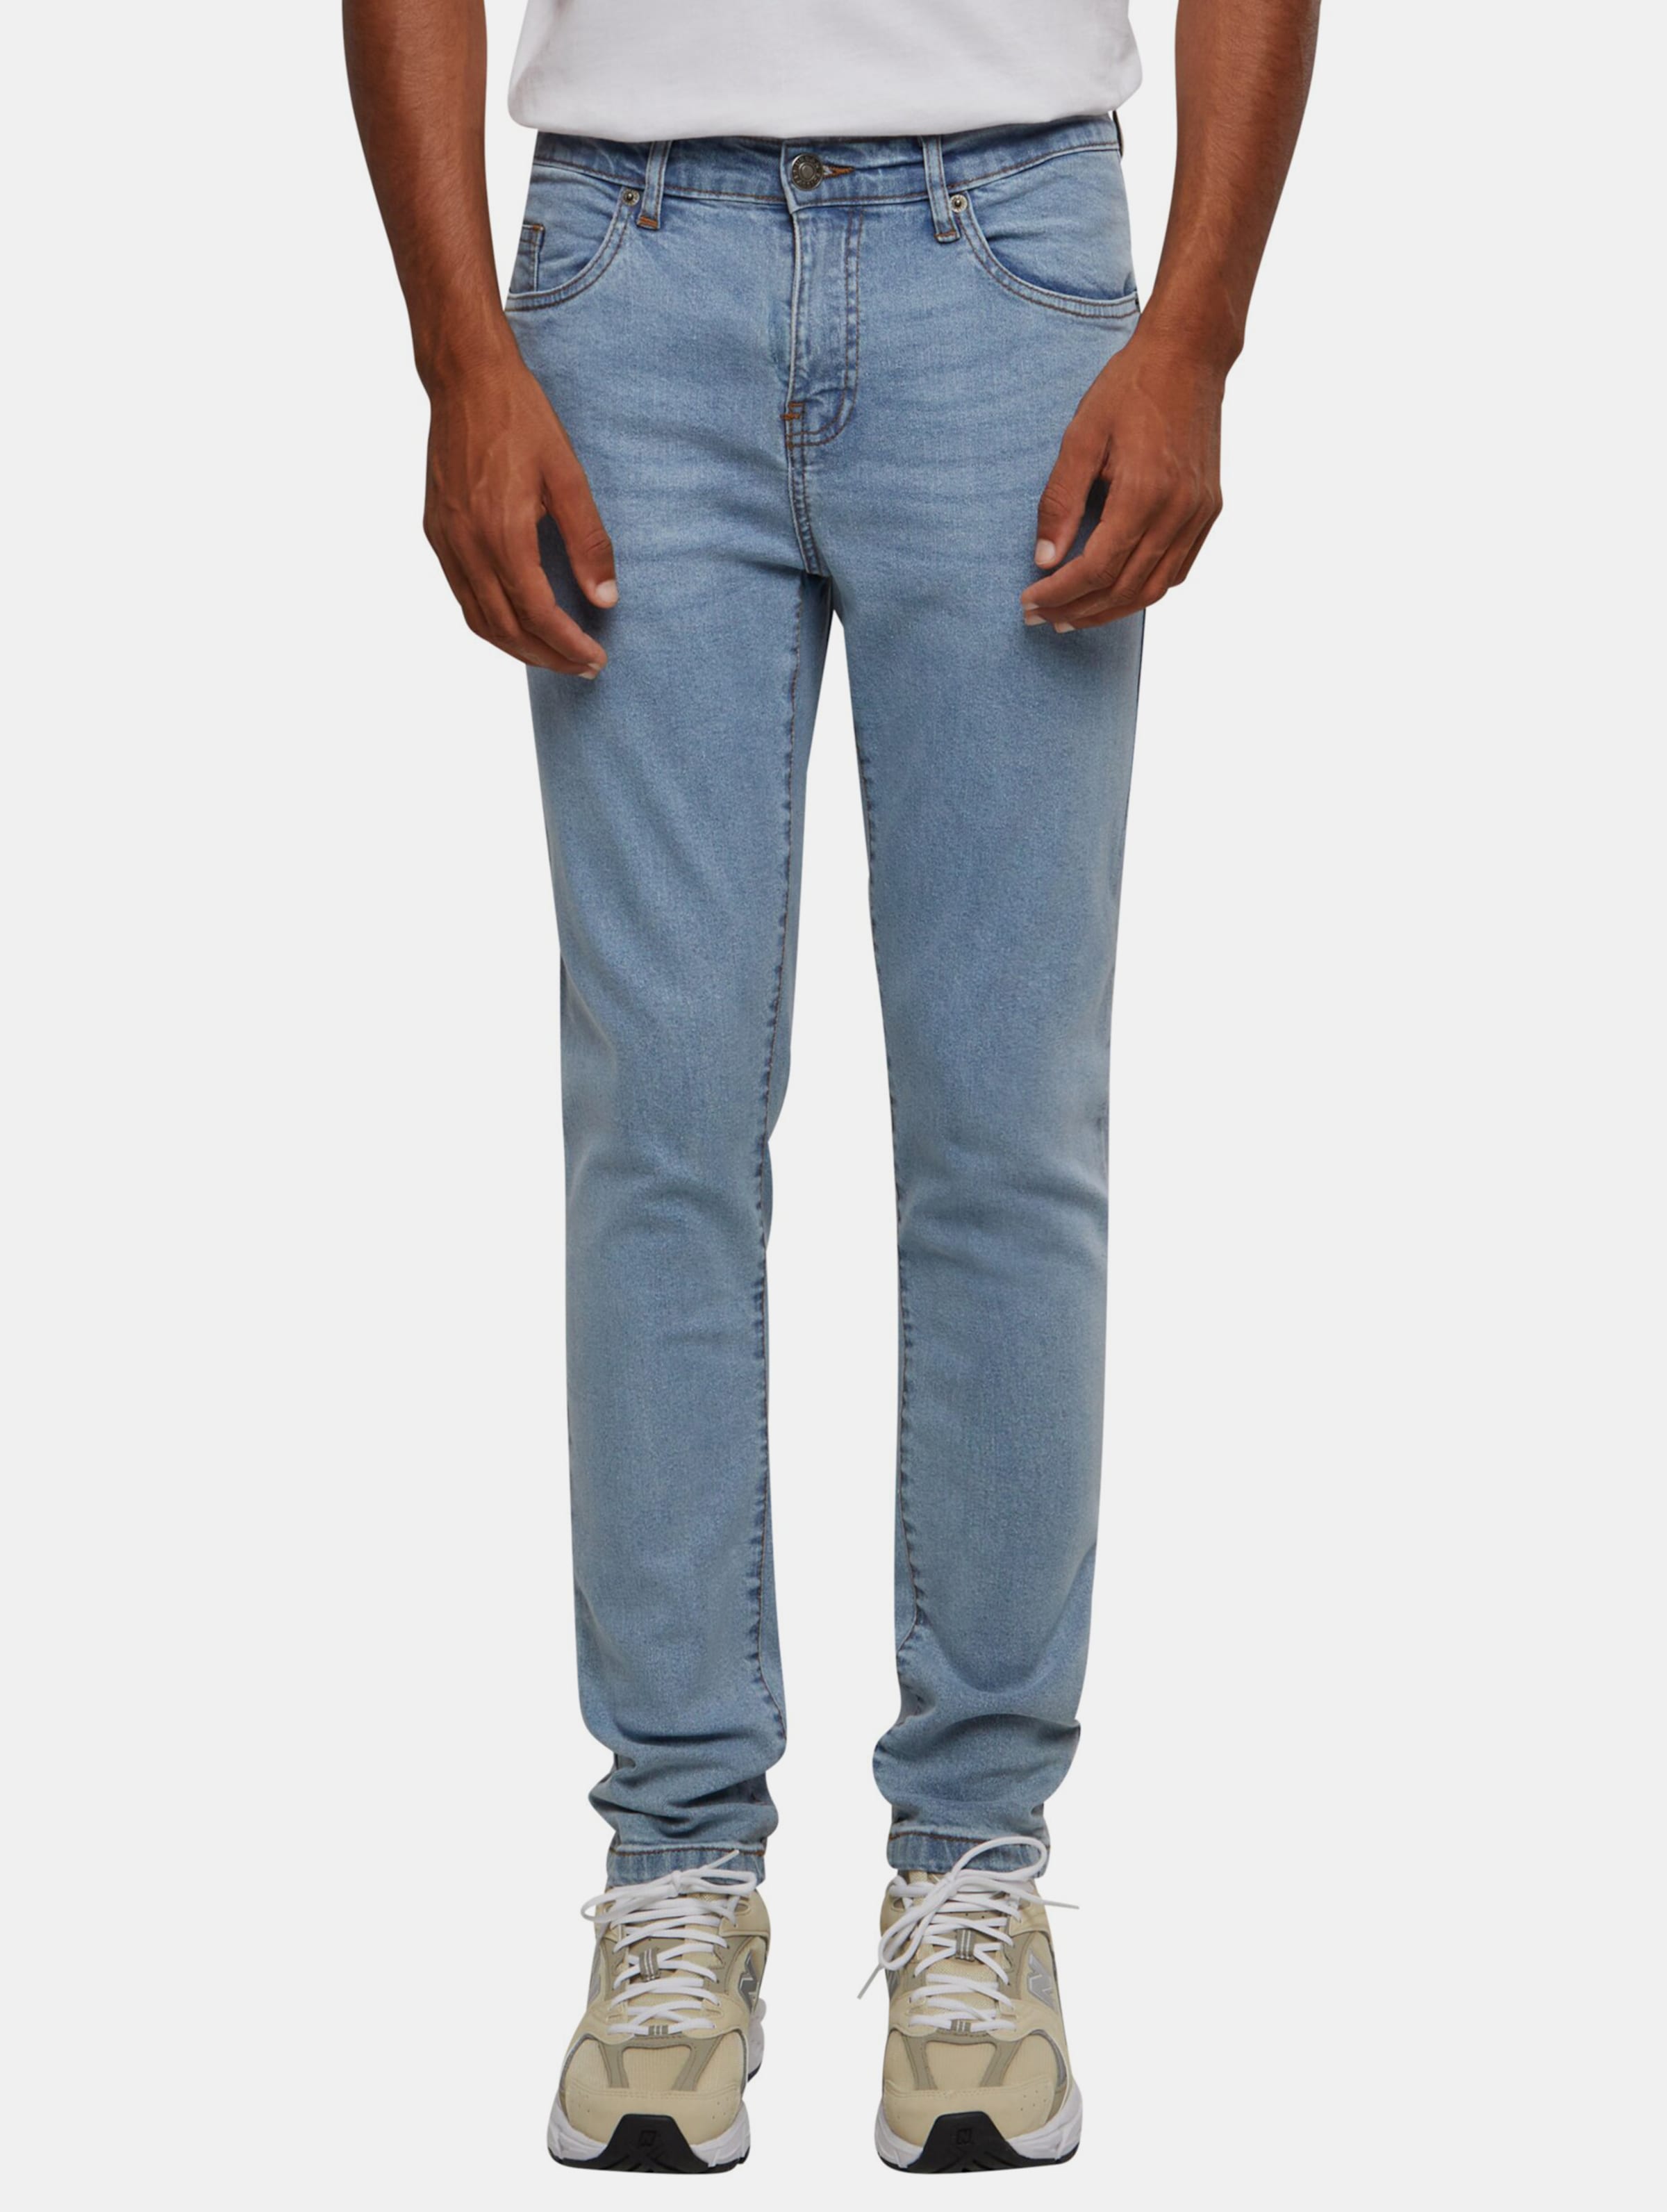 Urban Classics - Heavy Ounce Slim Fit Skinny jeans - Taille, 32 inch - Blauw